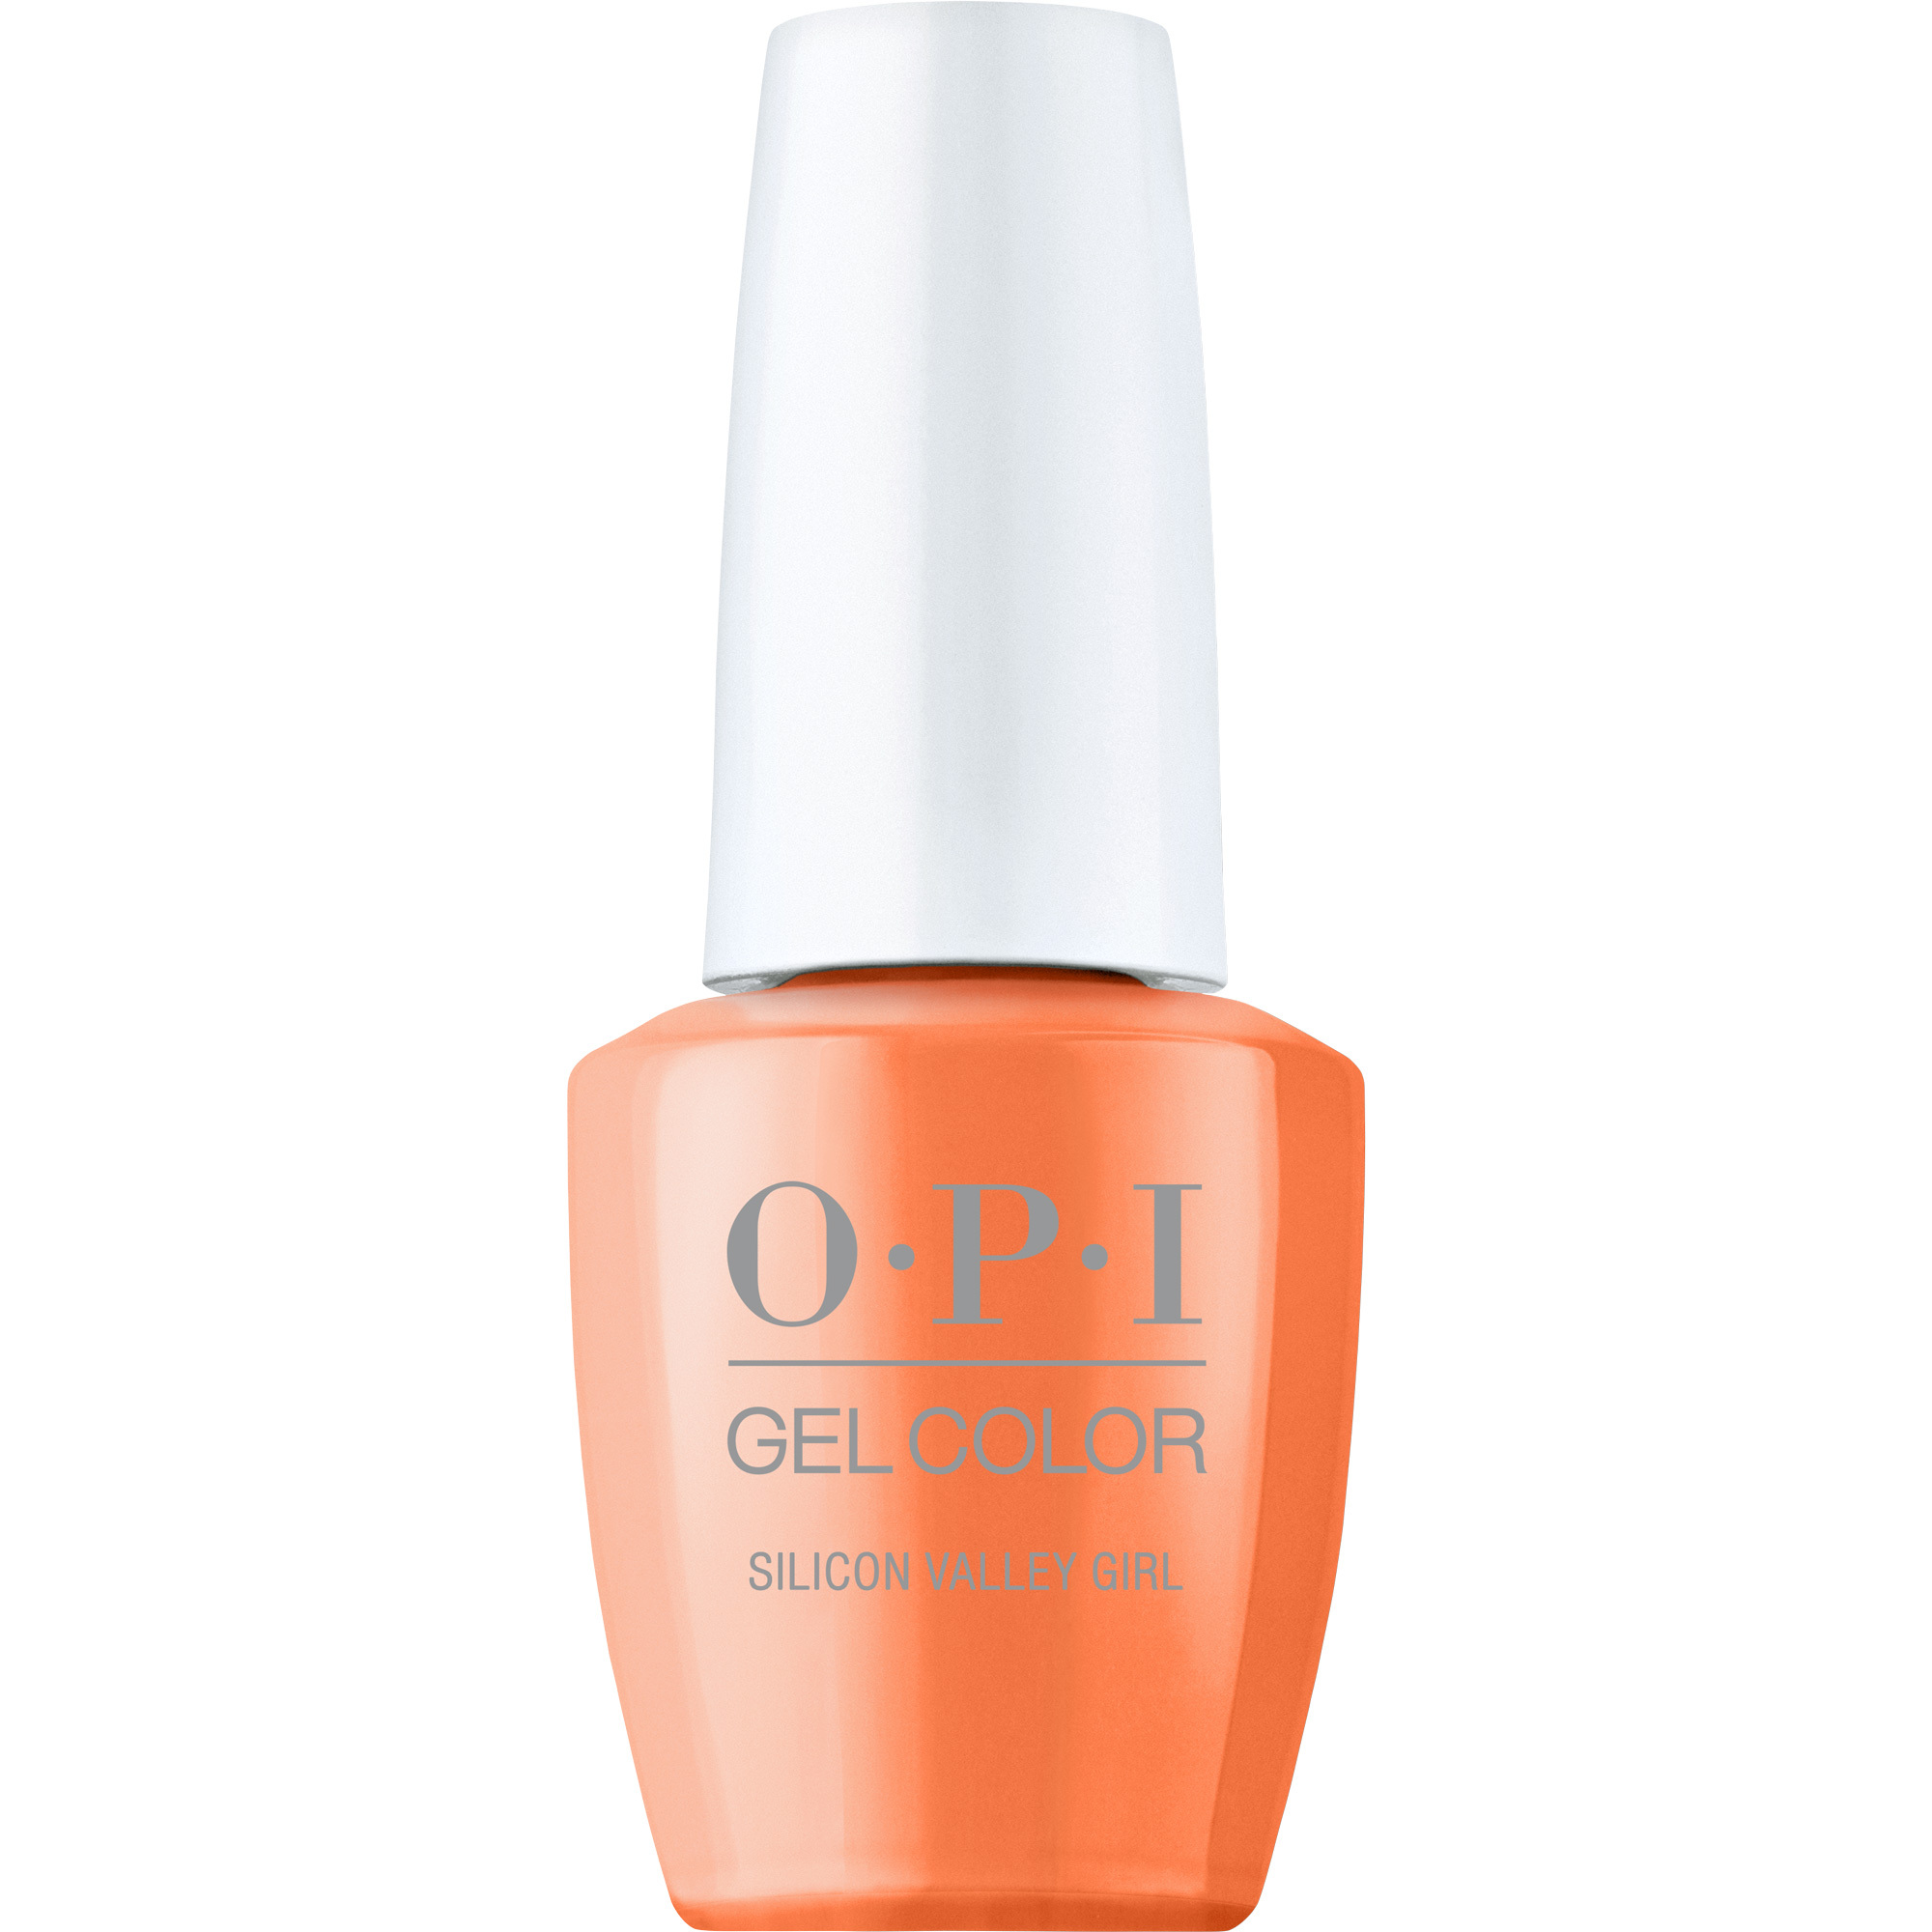 OPI Gel Color 360 - Silicon Valley Girl